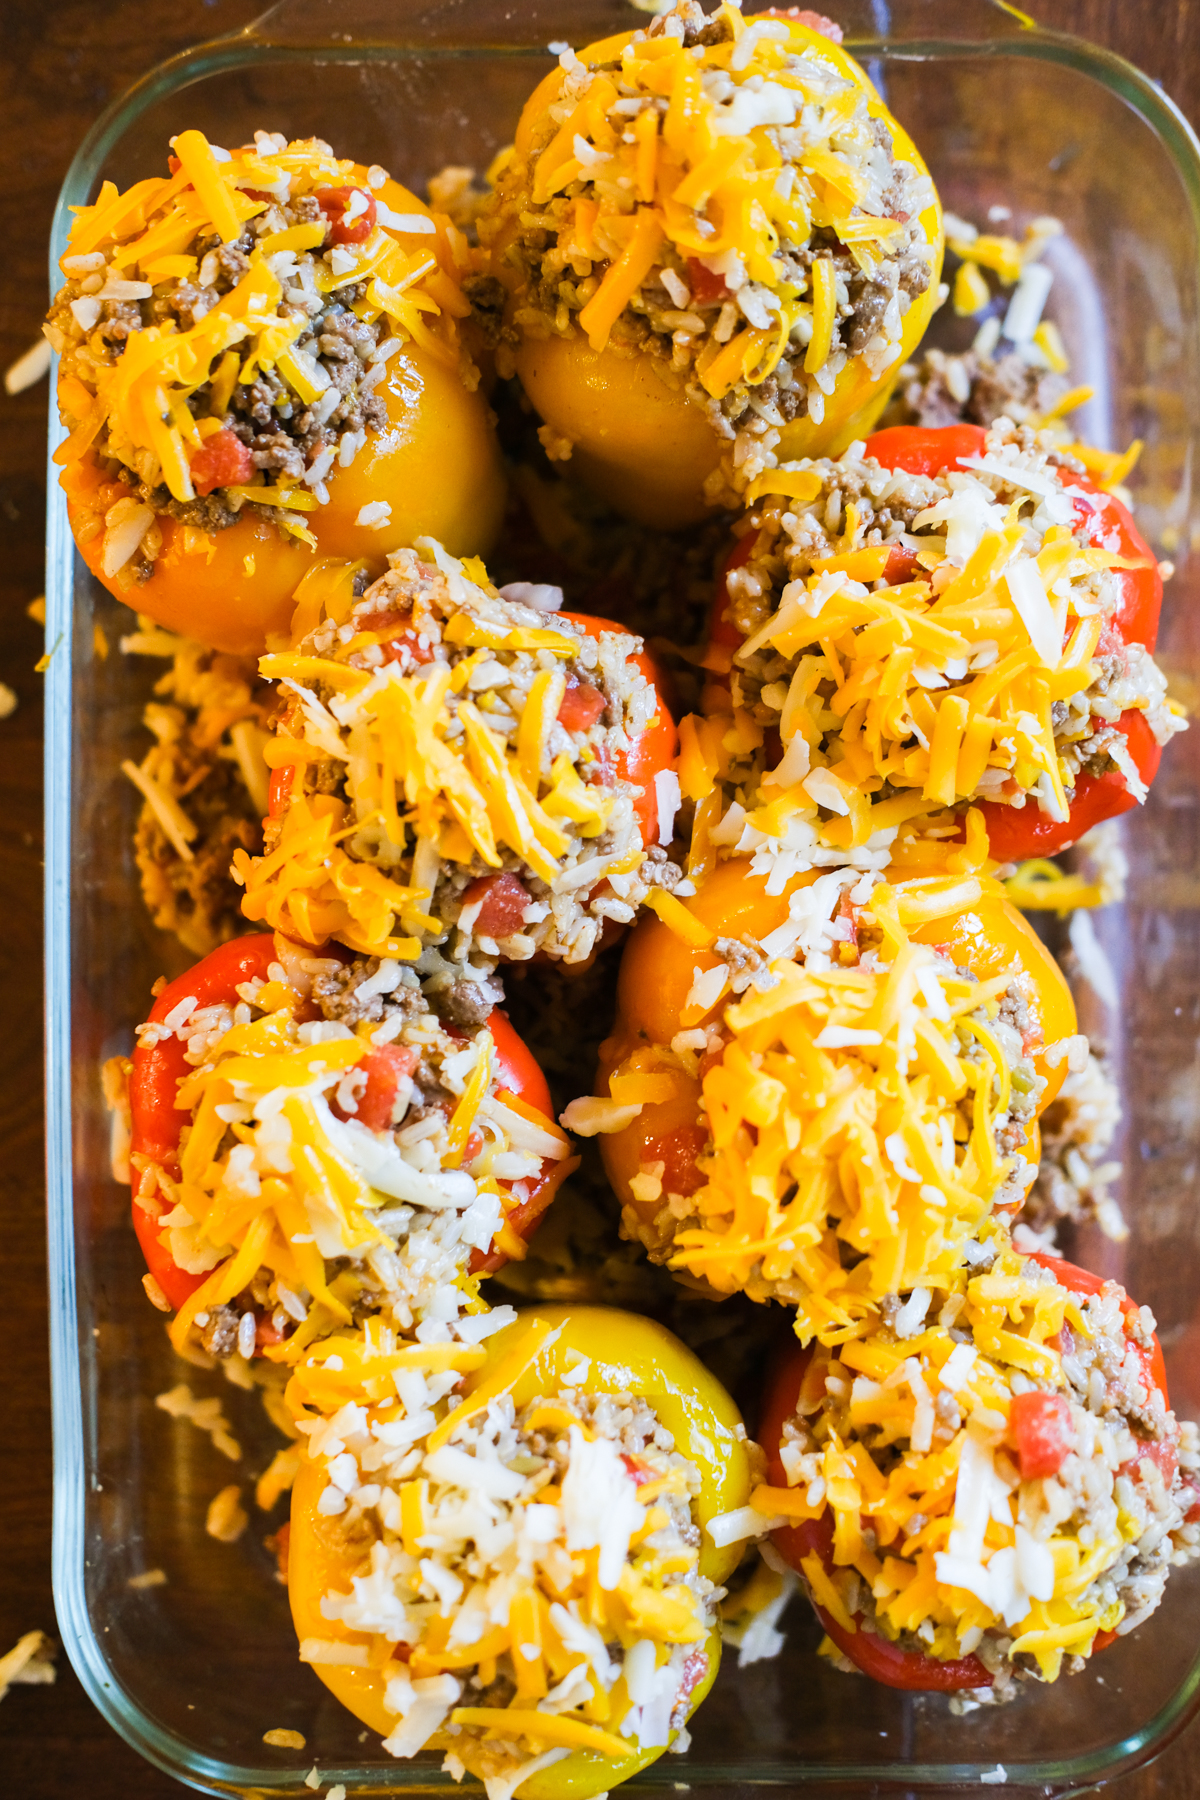 prepared stuffed peppers before they bake in the oven